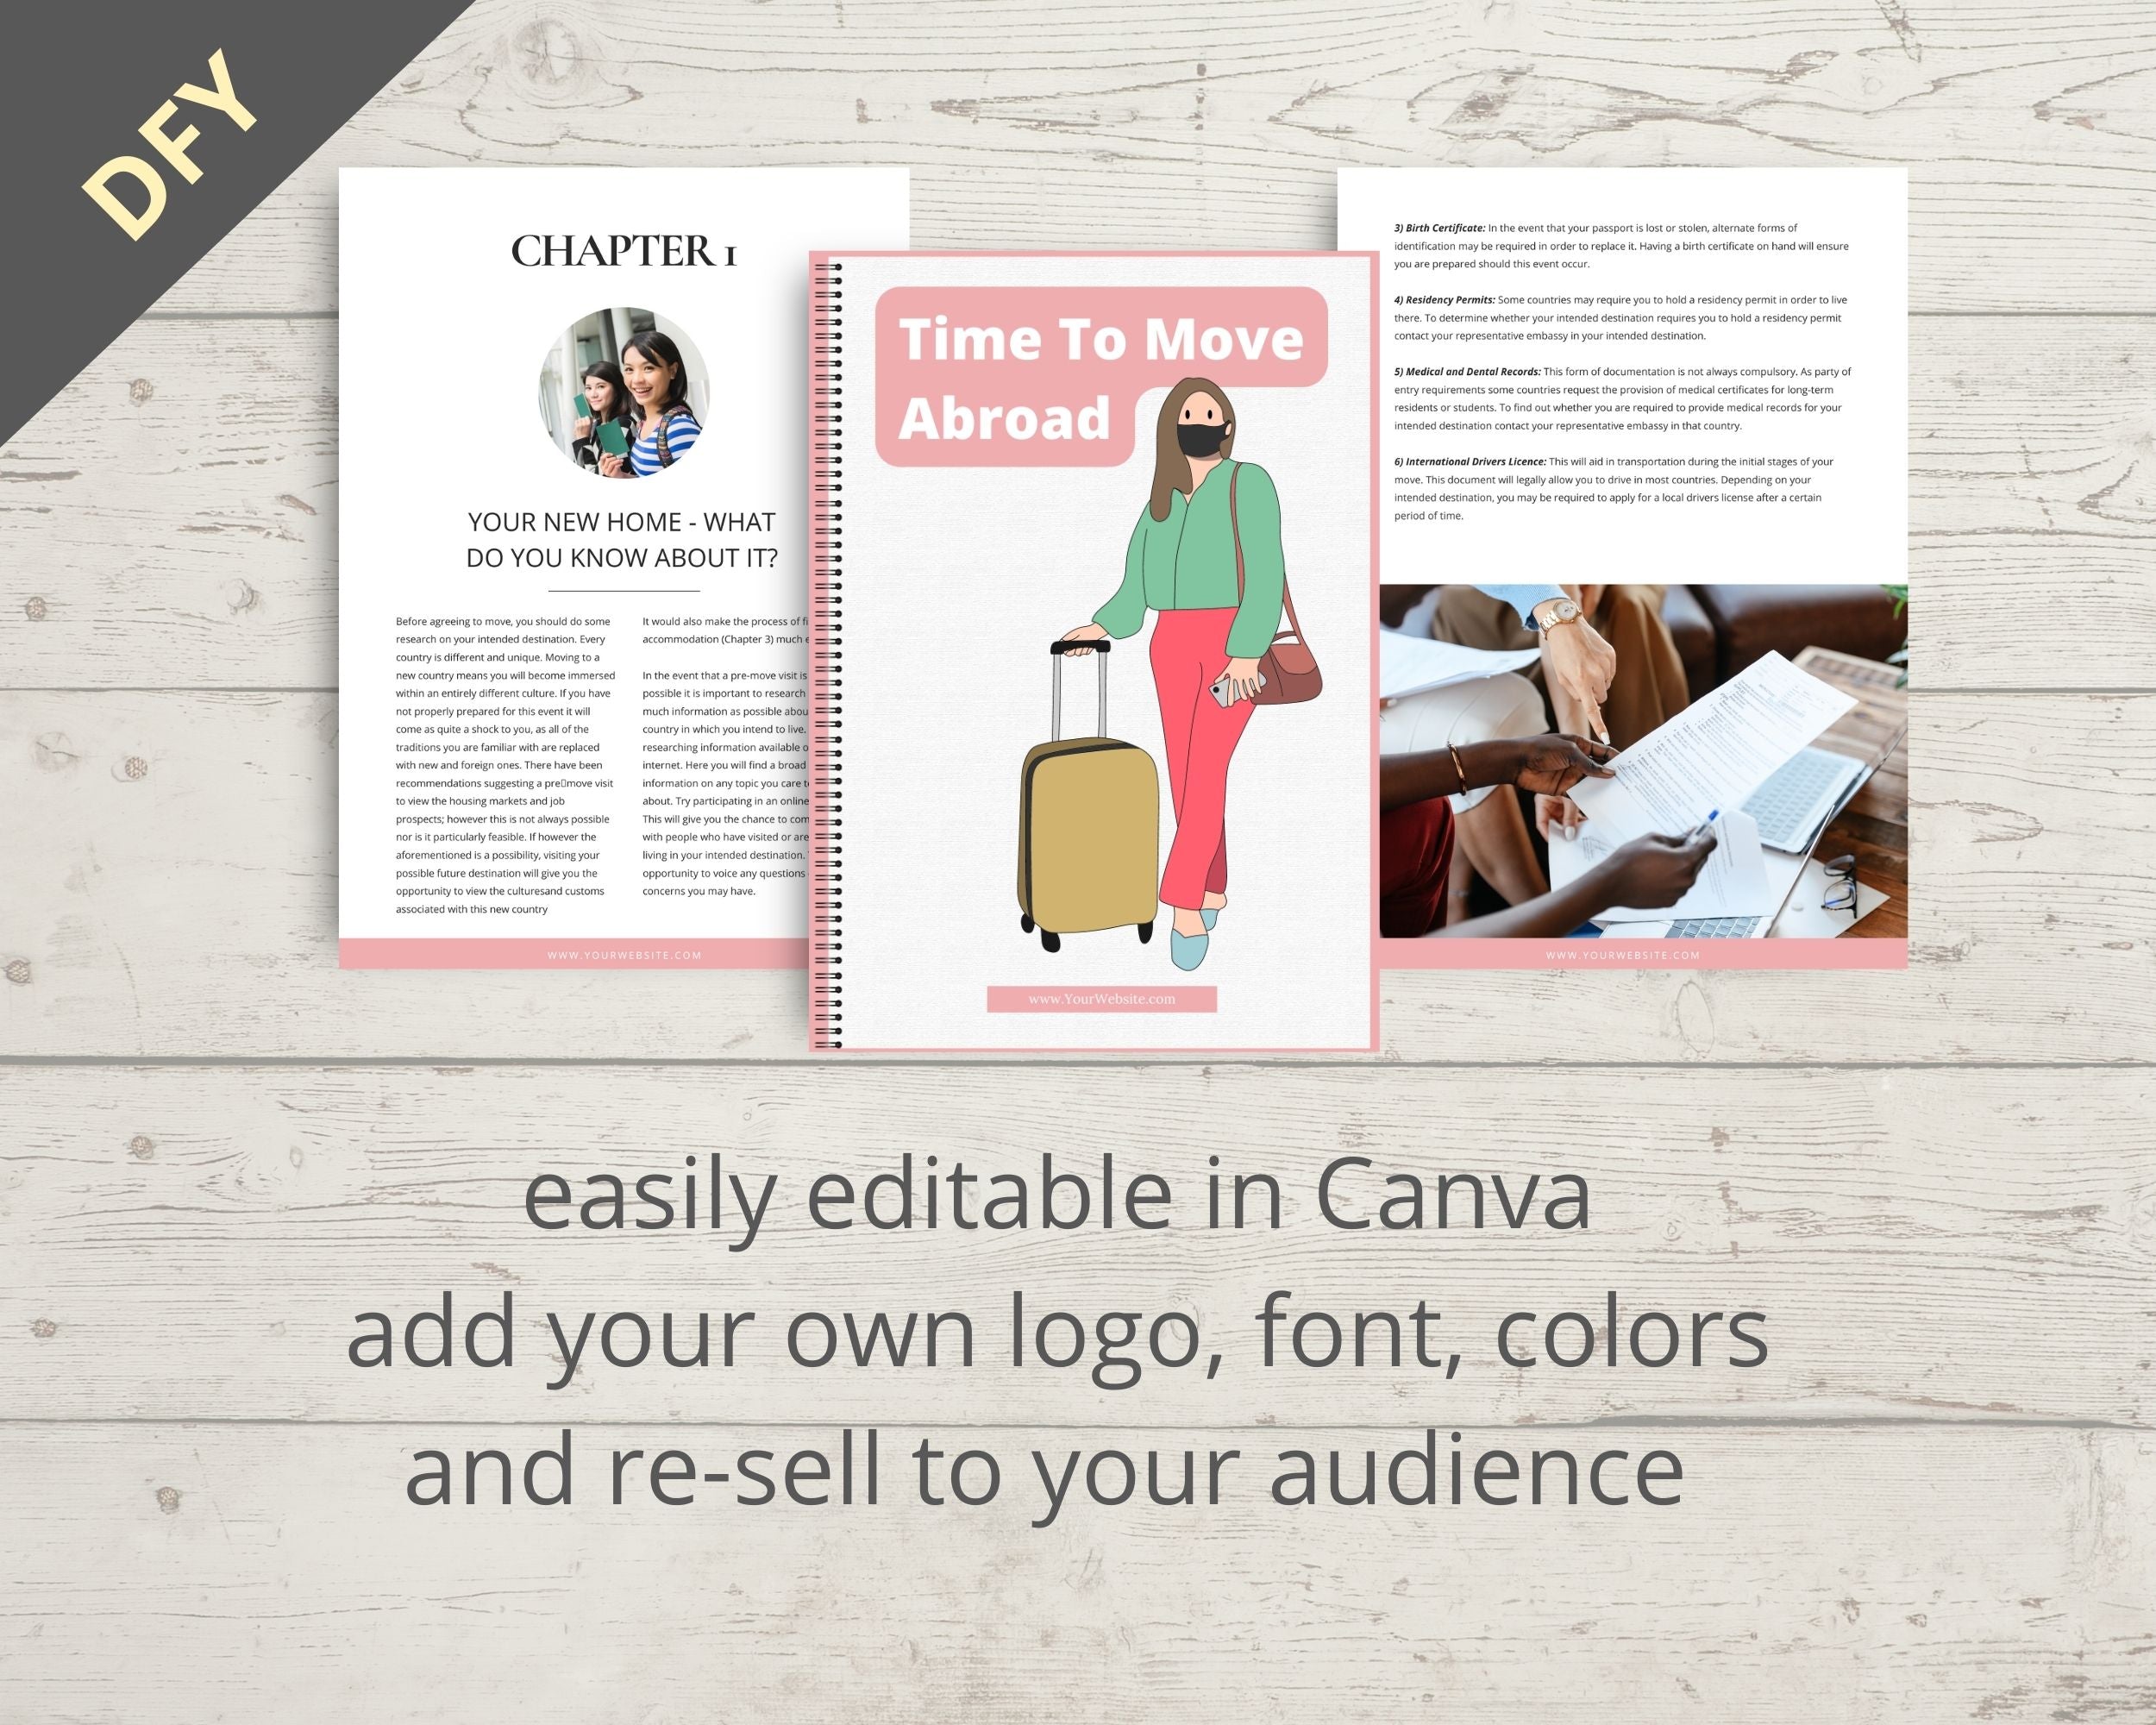 Editable Time To Move Abroad Ebook | Done-for-You Ebook in Canva | Rebrandable and Resizable Canva Template